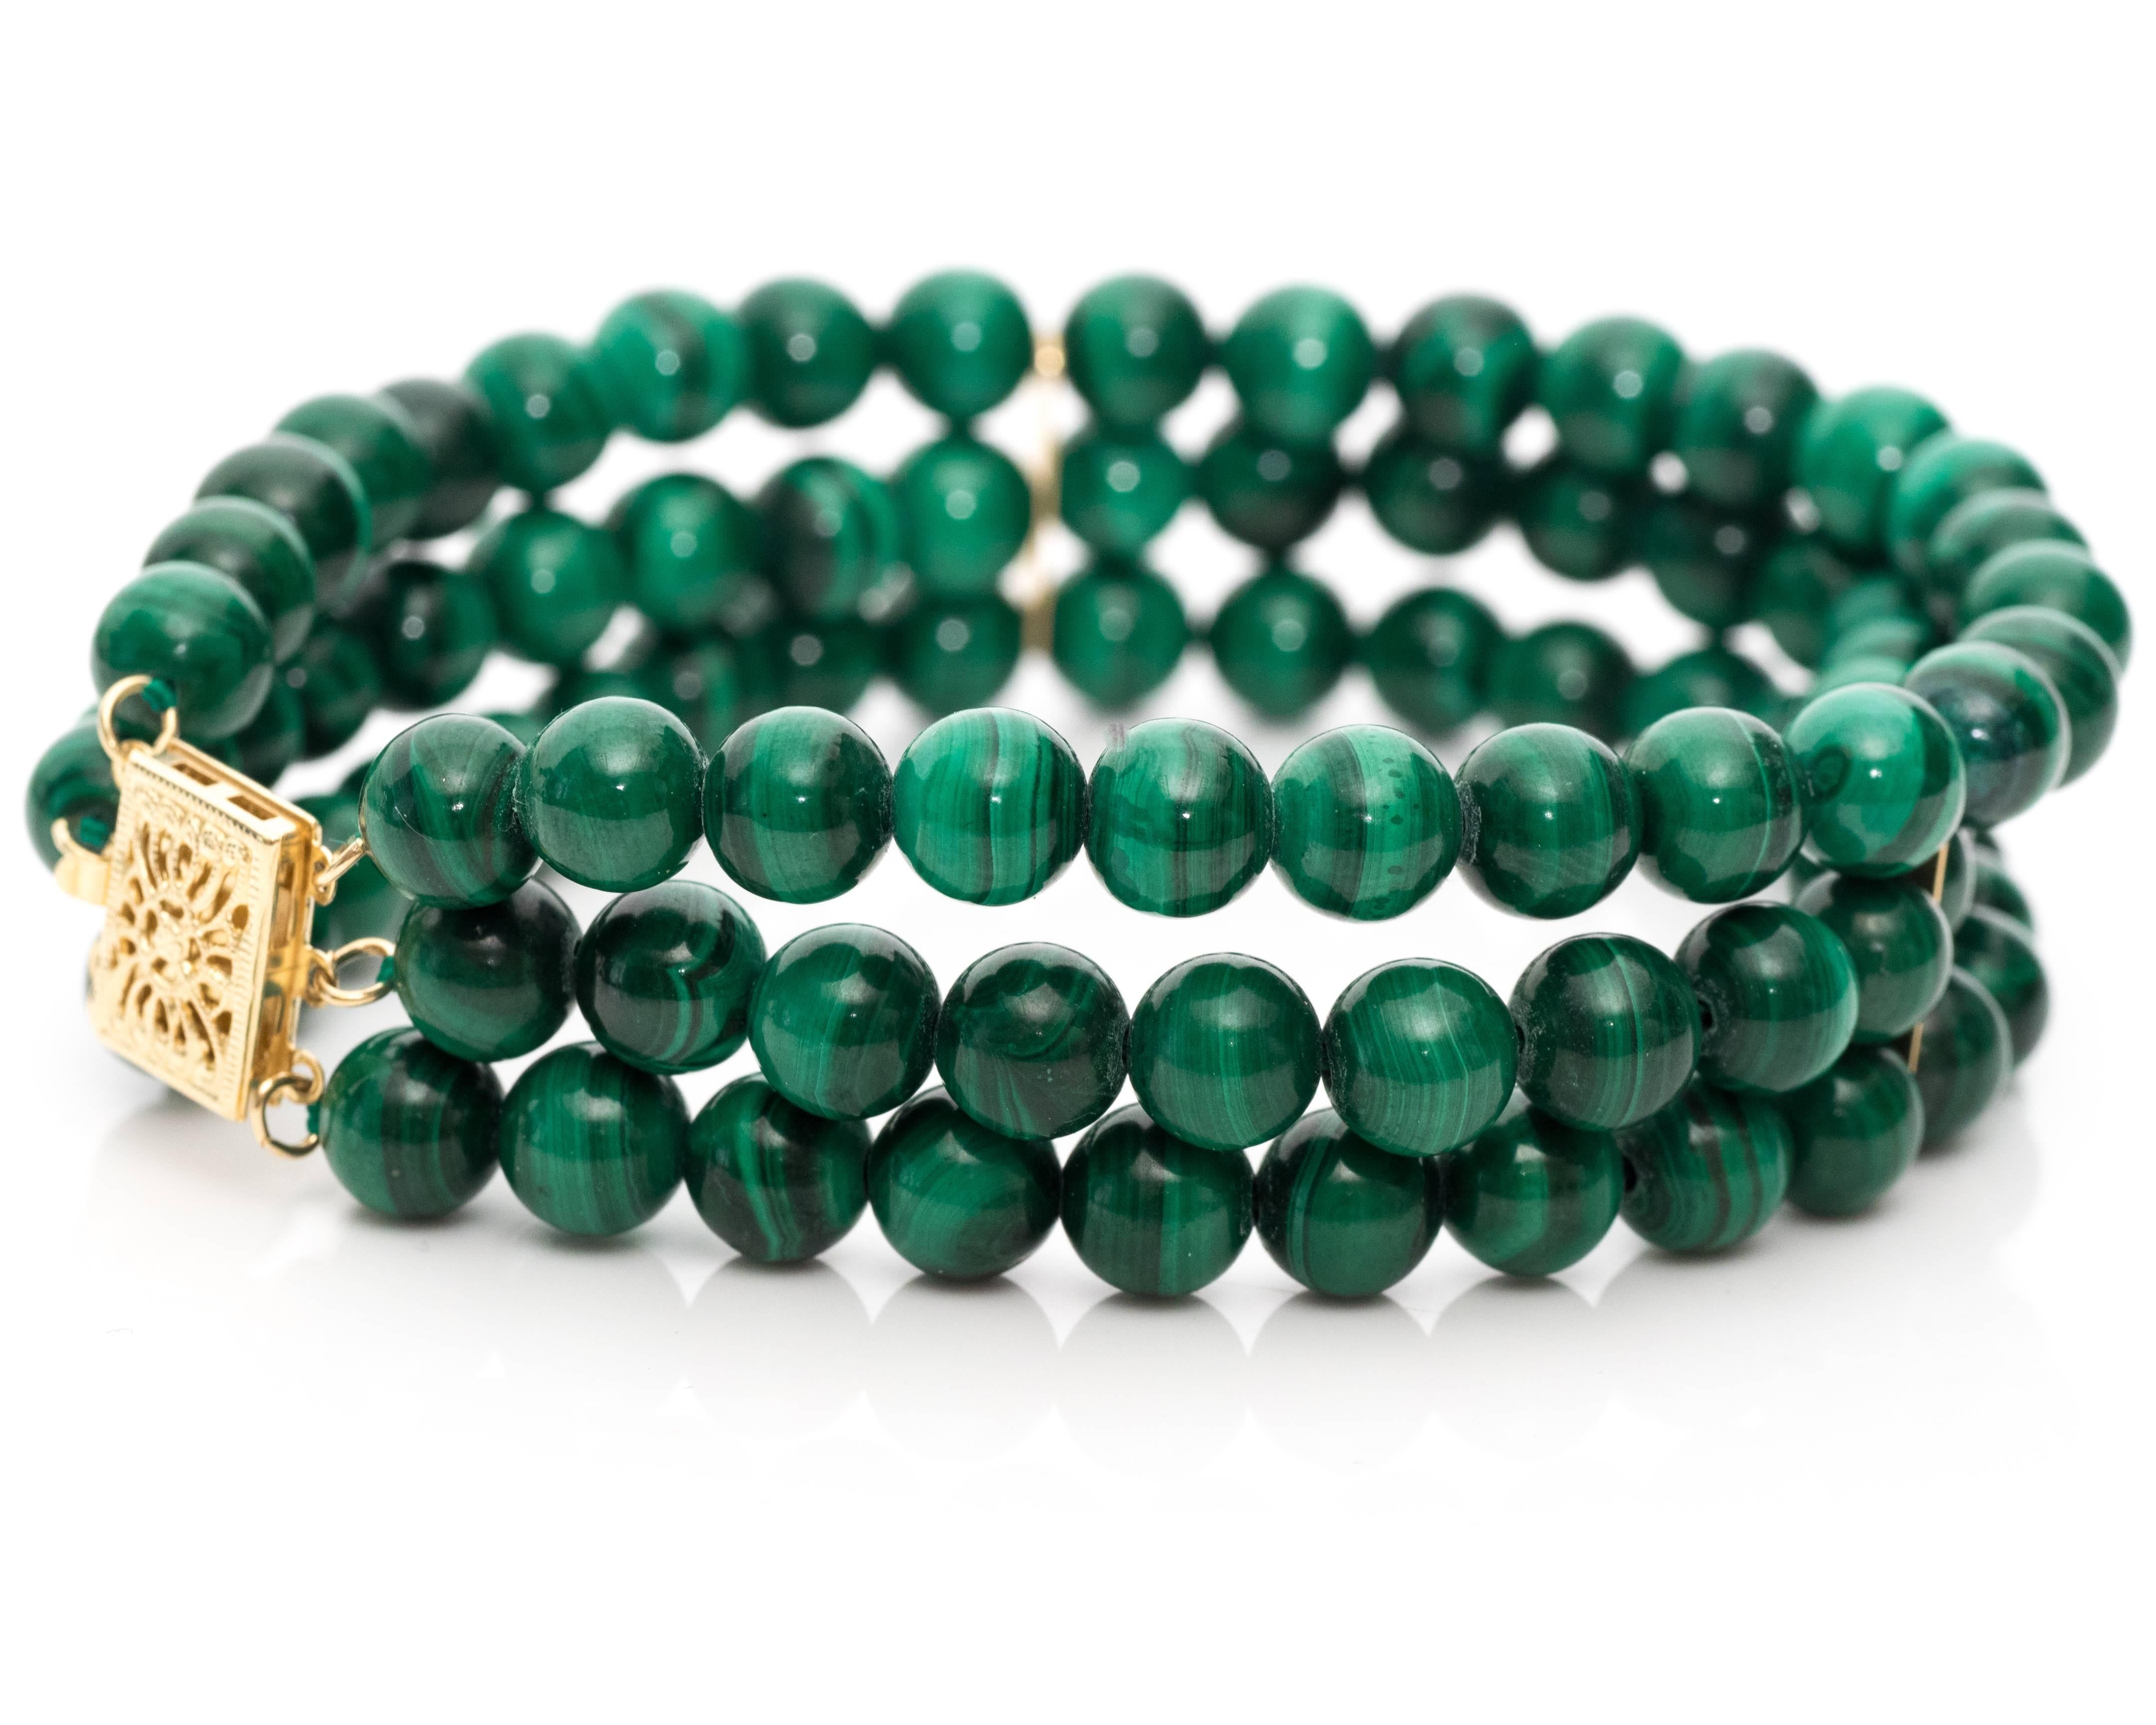 Gorgeous Hues of Emerald Green Malachite Beads Craft this Stunning Bracelet
Clasp is 14 Karat Yellow Gold with. Features a Clip for security when worn. It has beautiful filigree mesh like design on the clasp. 

1950s
3 Rows of Malachite Beads all